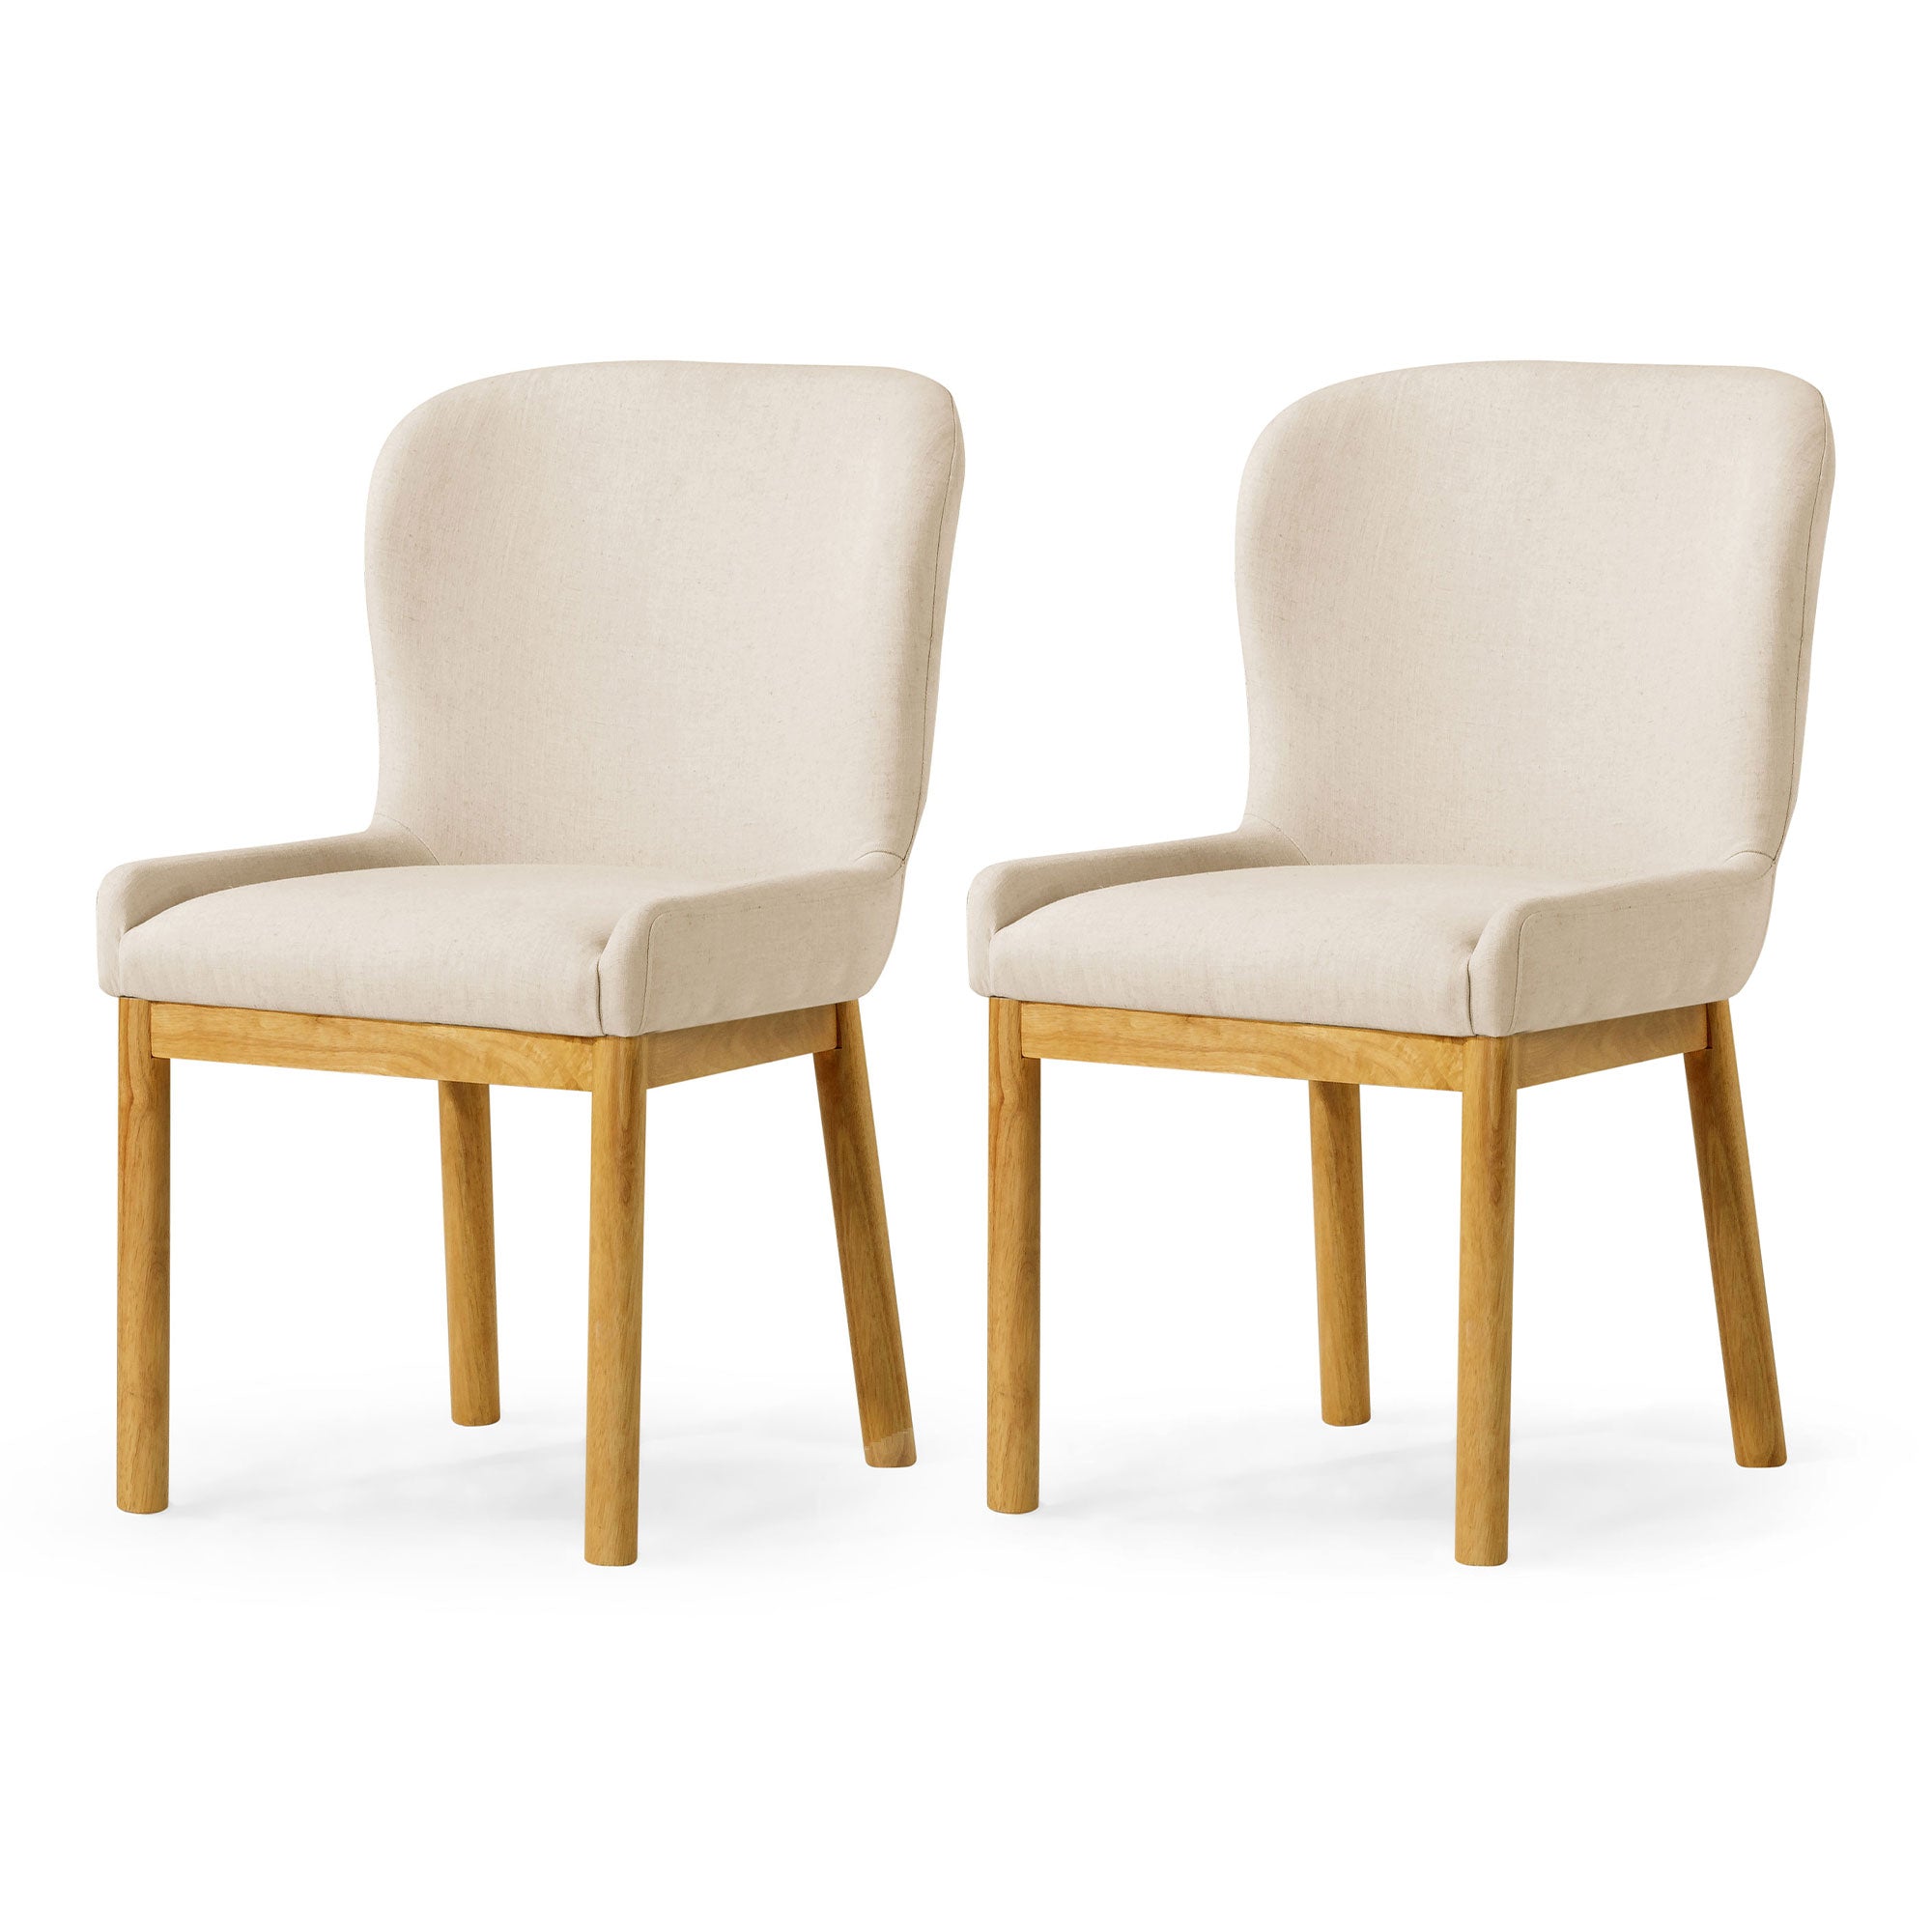 Gia Contemporary Wooden Dining Chair in Refined Natural Finish with Slate Linen Fabric Upholstery, Set of 2 in Dining Furniture by Maven Lane